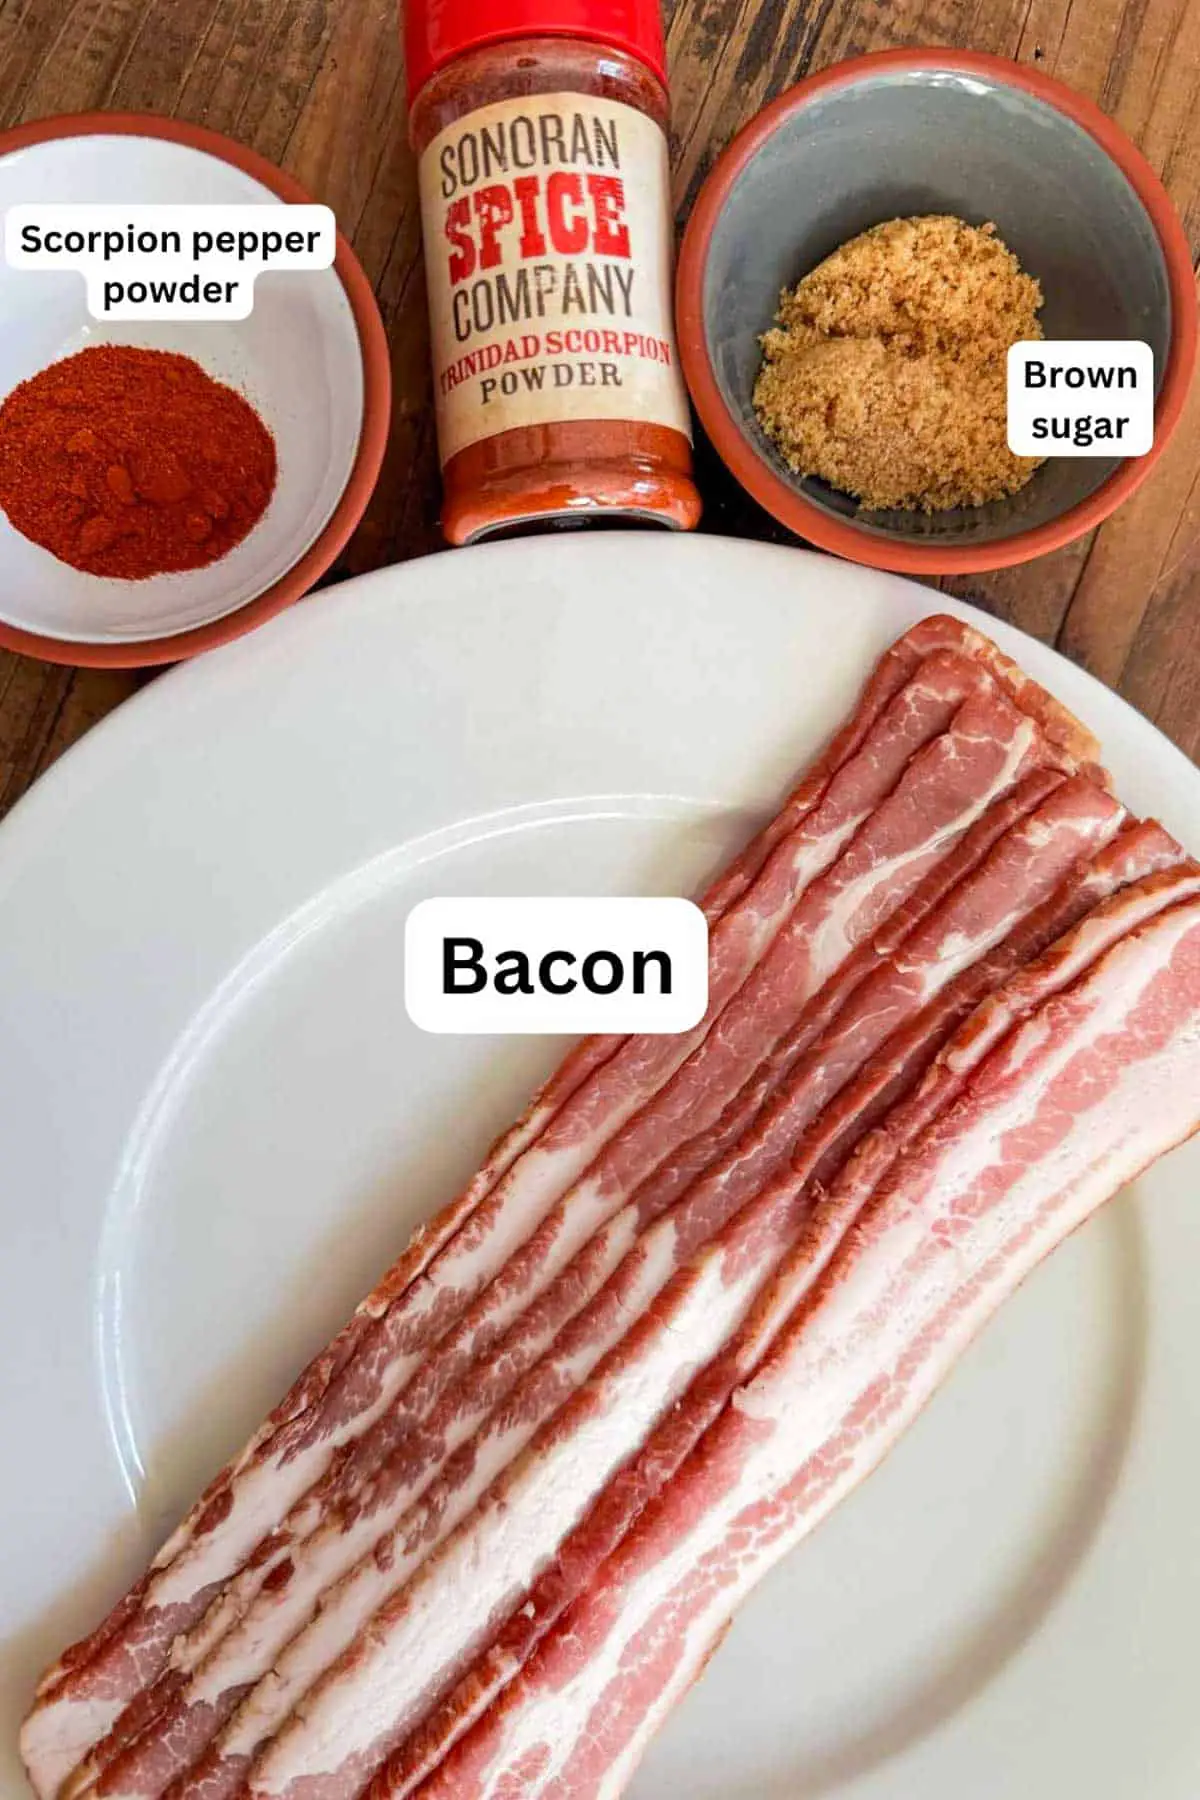 Bowls containing brown sugar and scorpion pepper powder, and uncooked bacon on a plate. There is also a bottle of Sonoran Spice Company Trinidad Scorpion Powder.